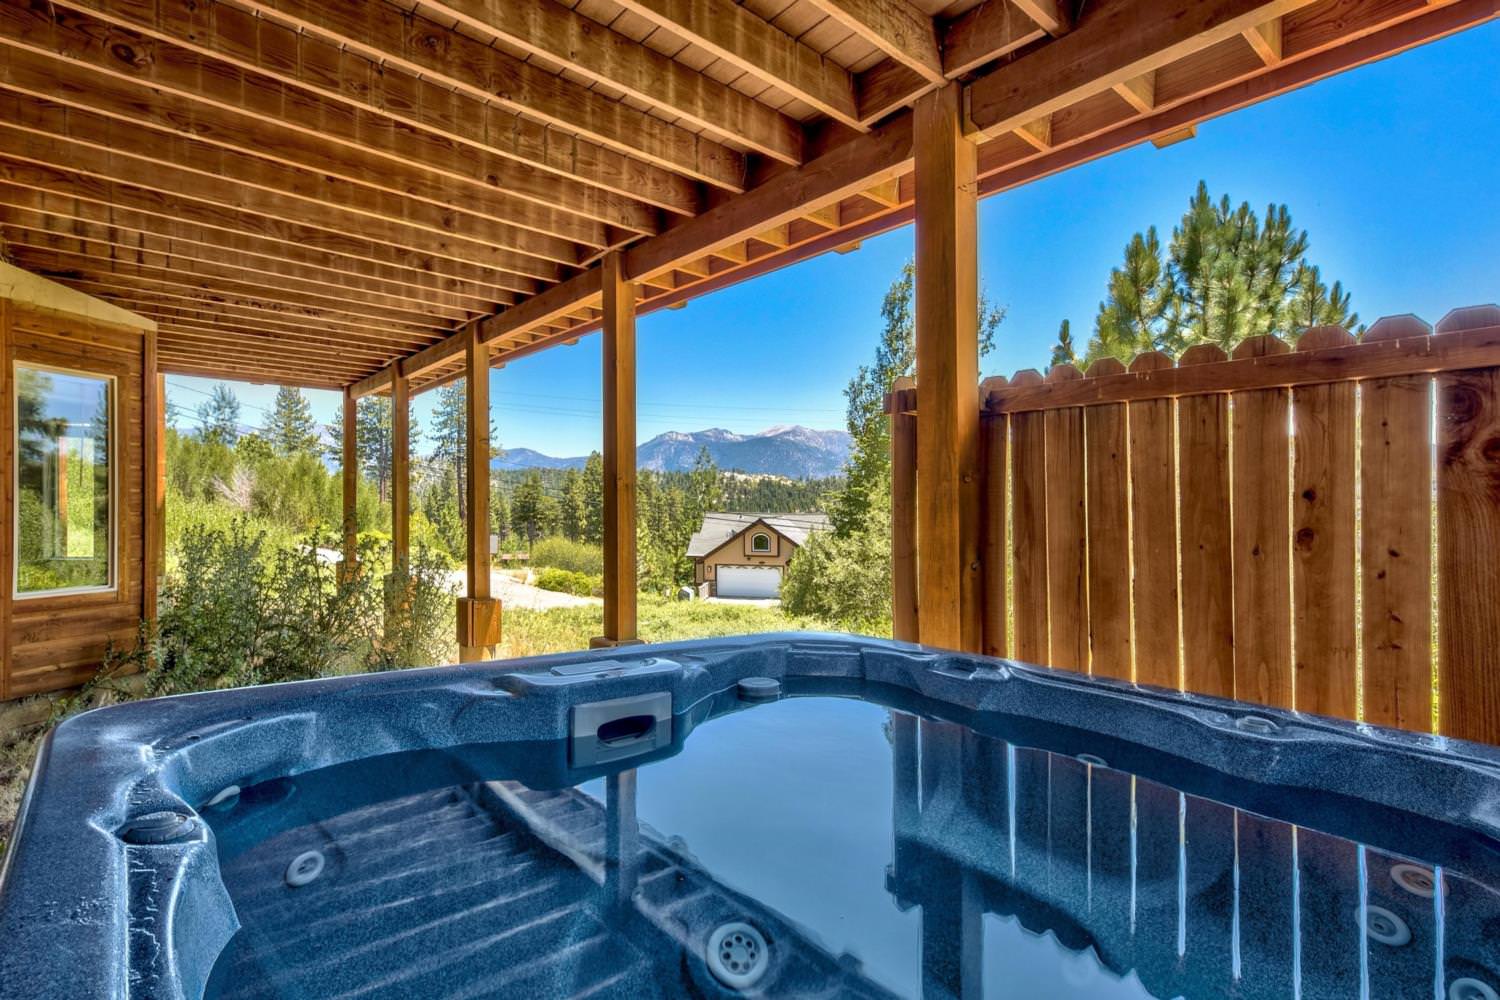 Covered outdoor hot tub